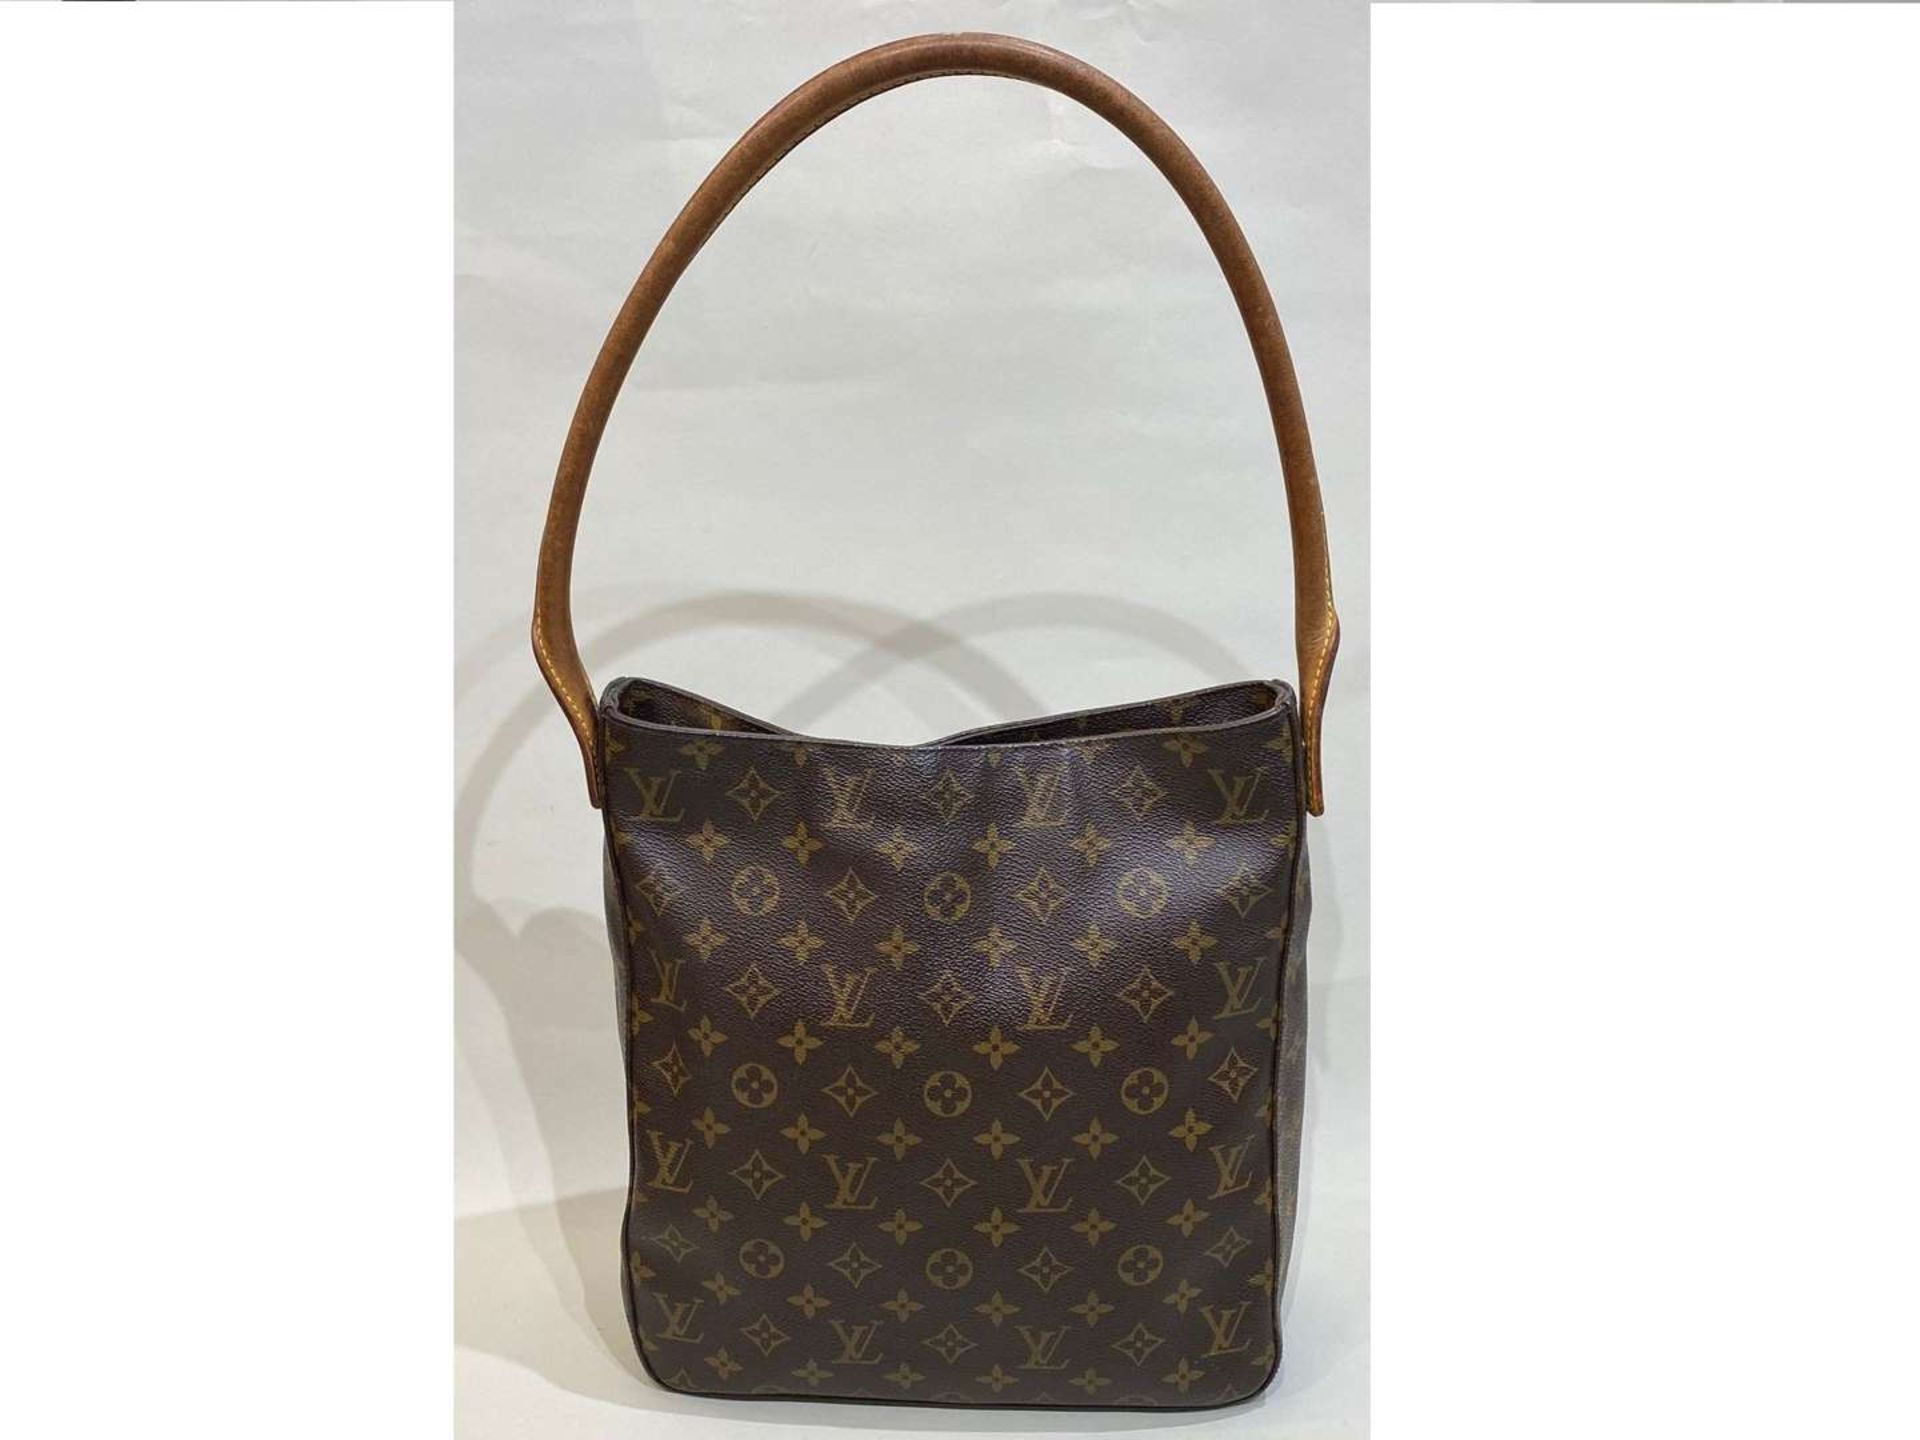 LOUIS VUITTON, Looping, tan stitched leather and monogrammed shoulder bag